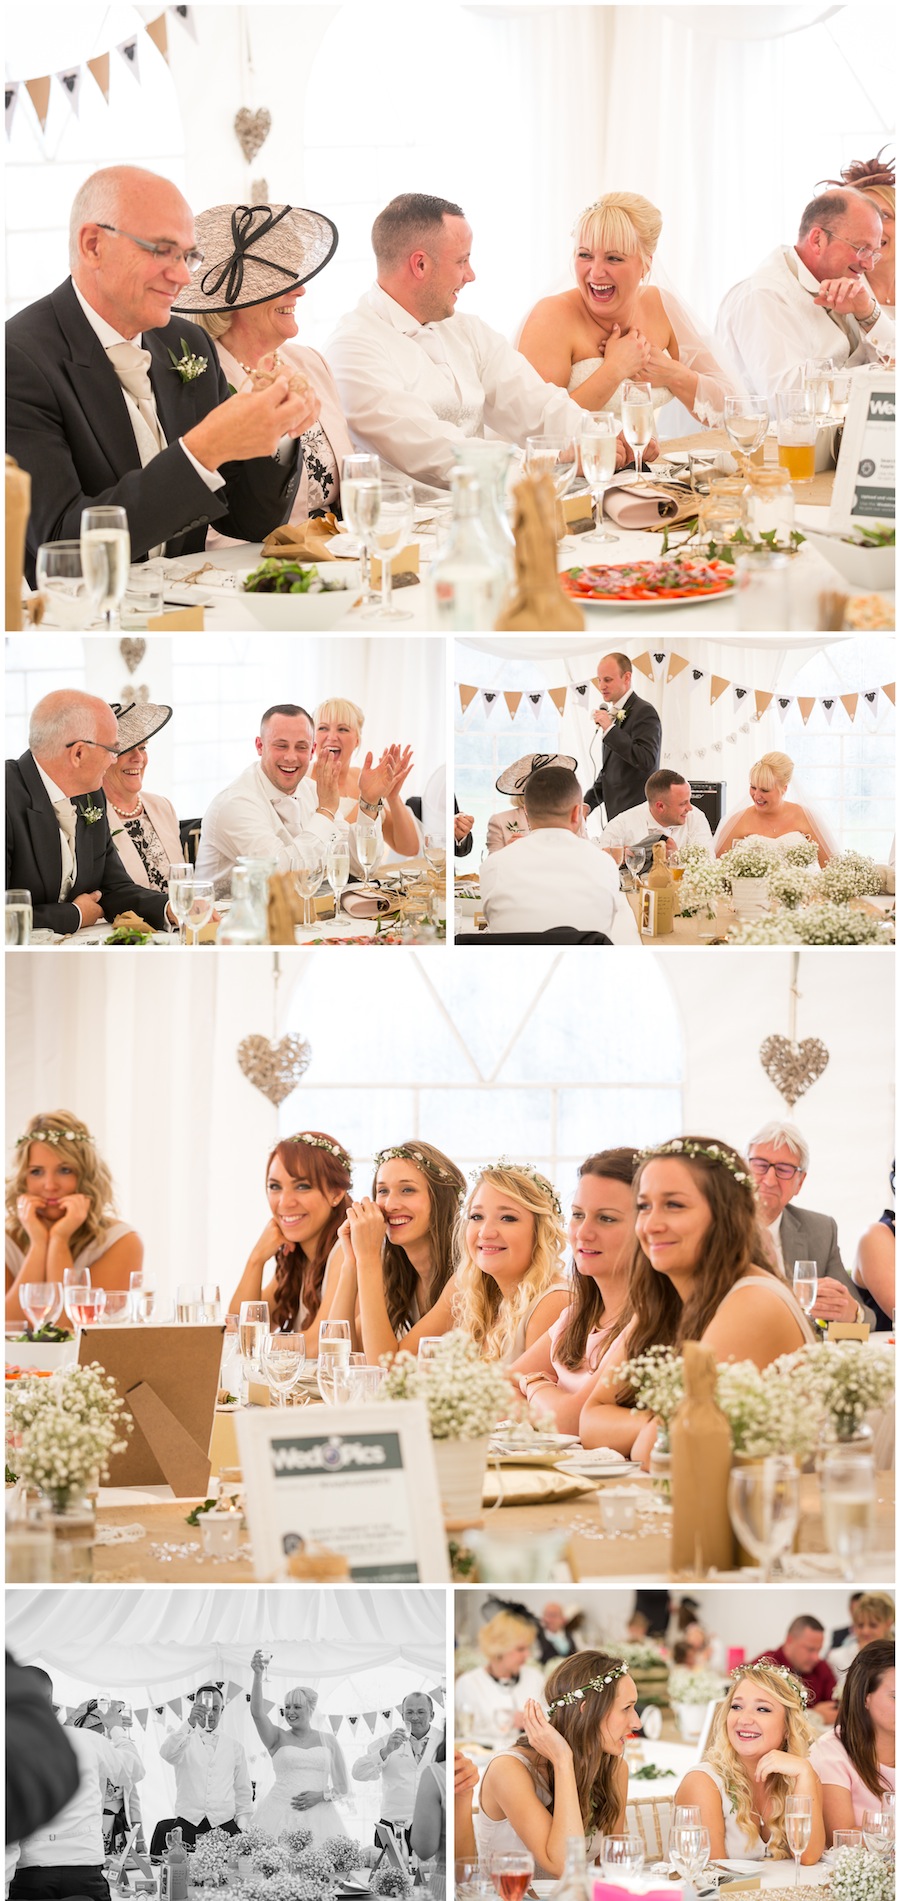 Frasers, Coldharbour Farm wedding